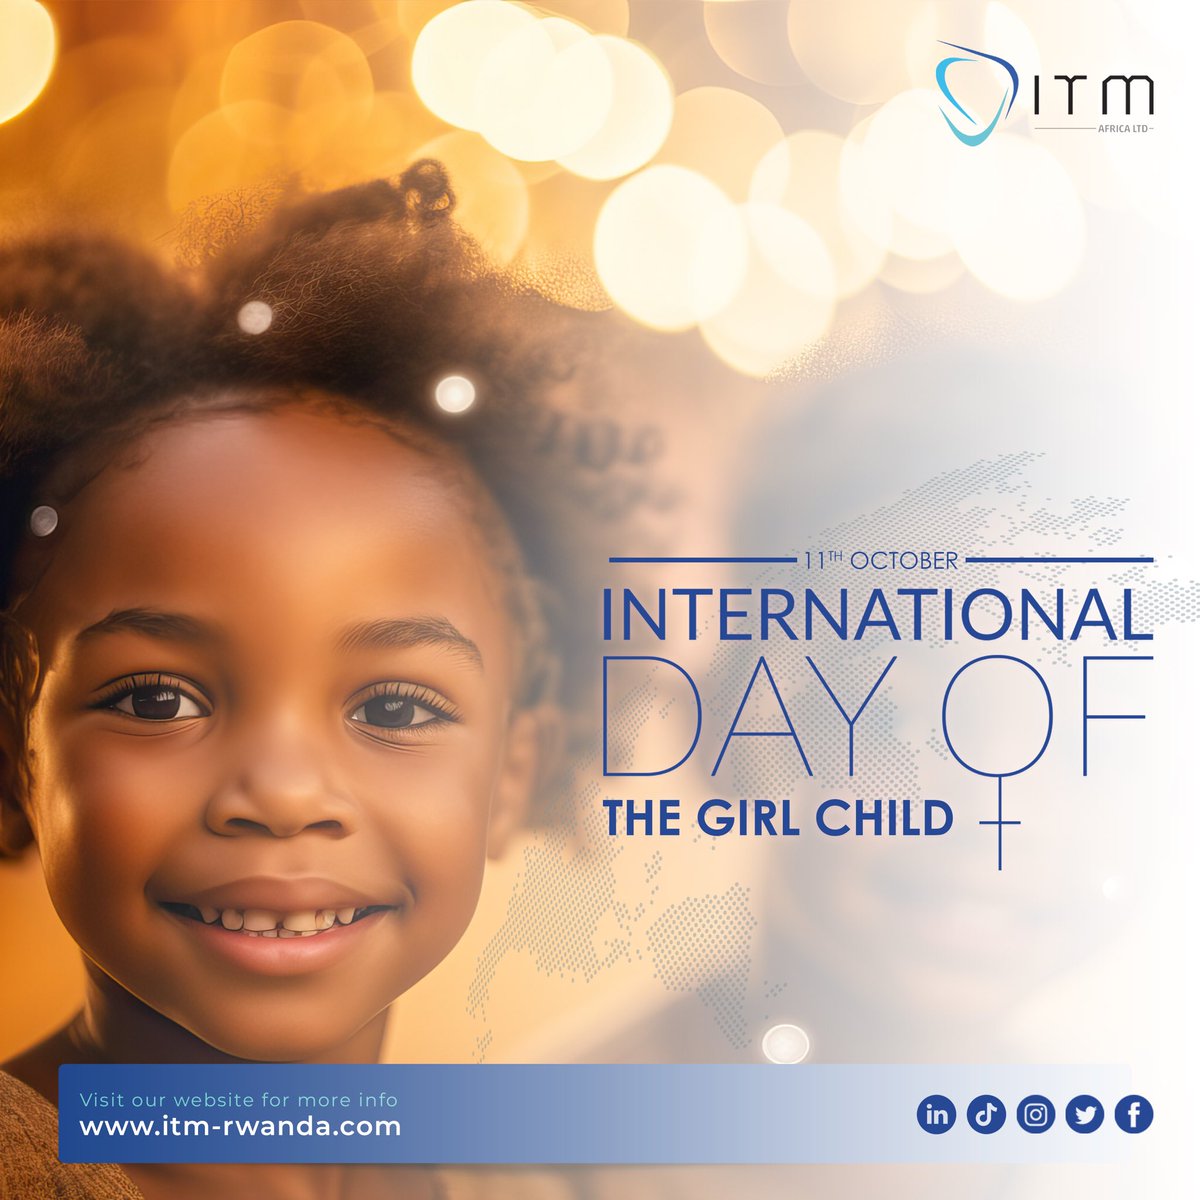 ✨Happy International Girls' Day!

Together, let's nurture their potential, uphold their rights, and create a world where every girl can thrive! 

💖🌍Invest in Girls' Rights: Our Leadership, Our Well-being.

#WeAreITM #GirlsRights #EmpowerGirls #InternationalDayOfTheGirl #RwOT